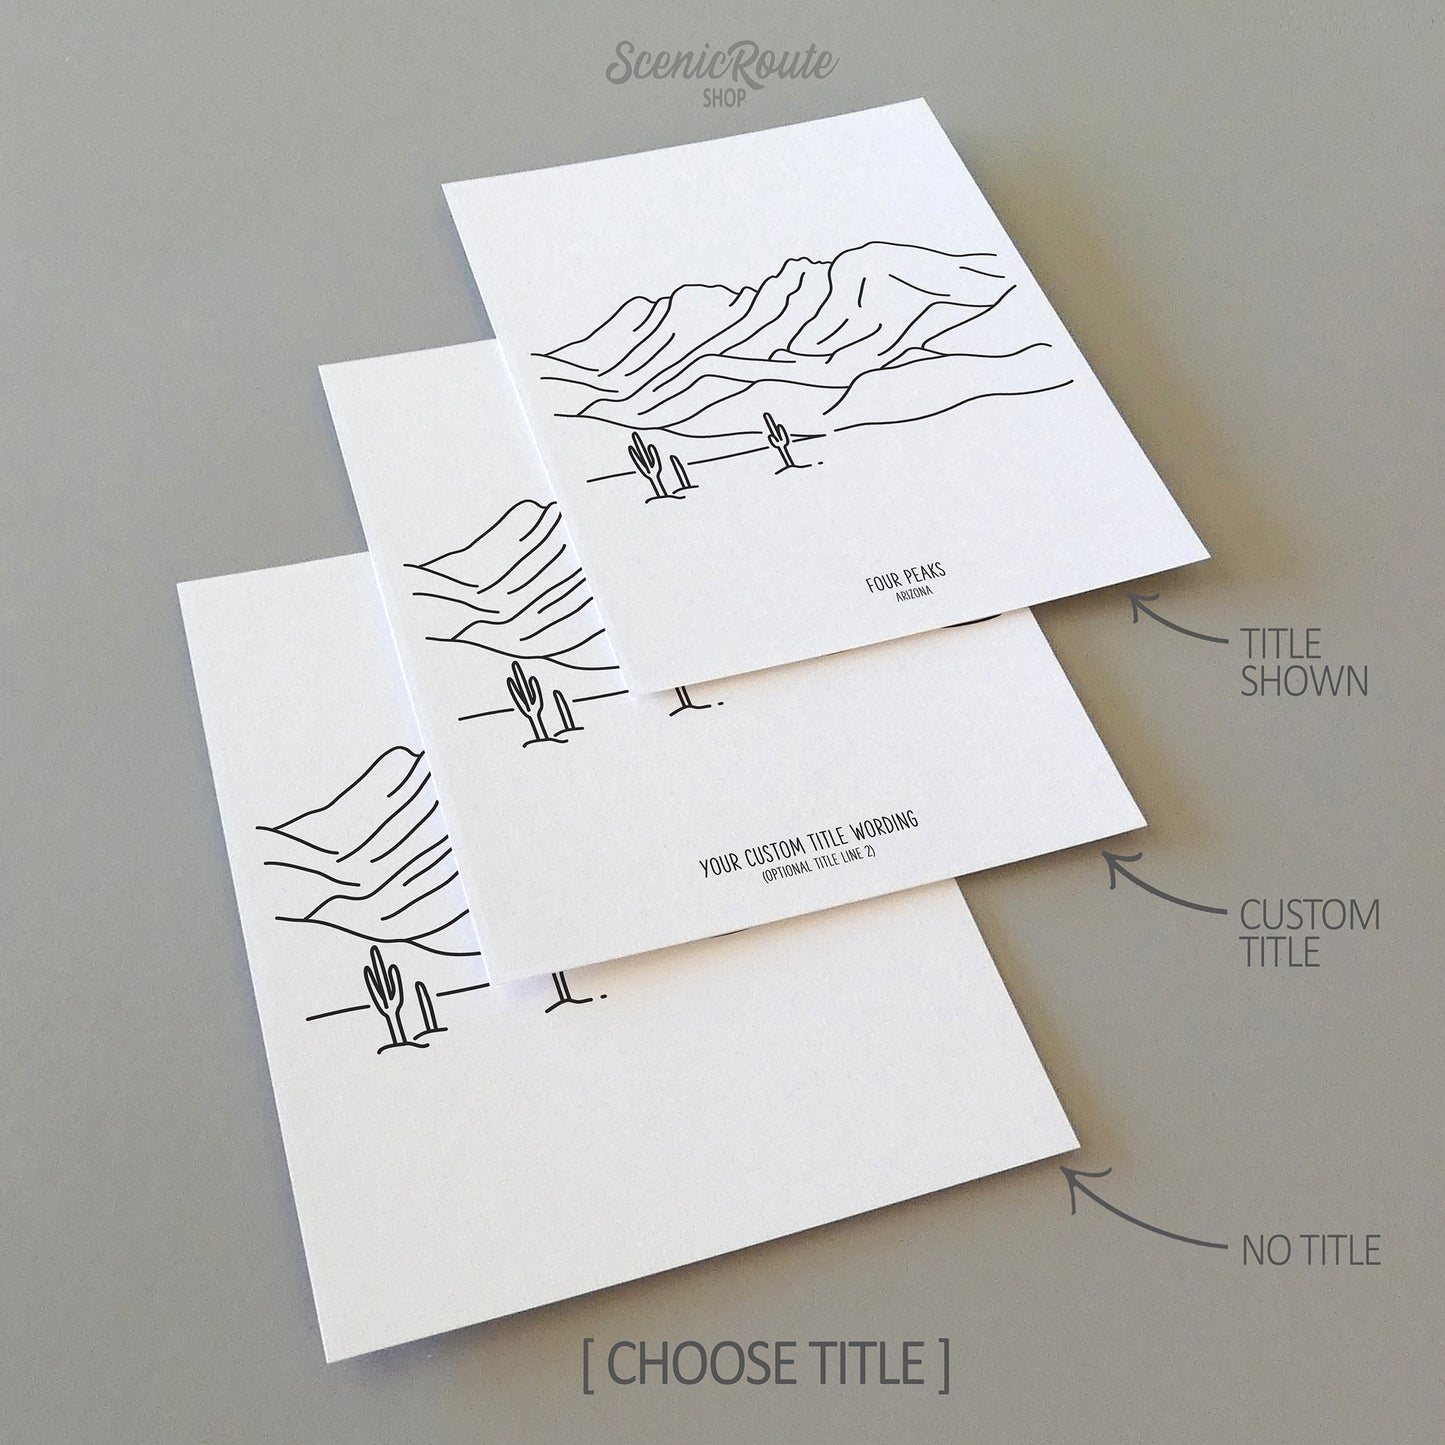 Three line art drawings of the Four Peaks Mountains in Arizona on white linen paper with a gray background.  The pieces are shown with title options that can be chosen and personalized.